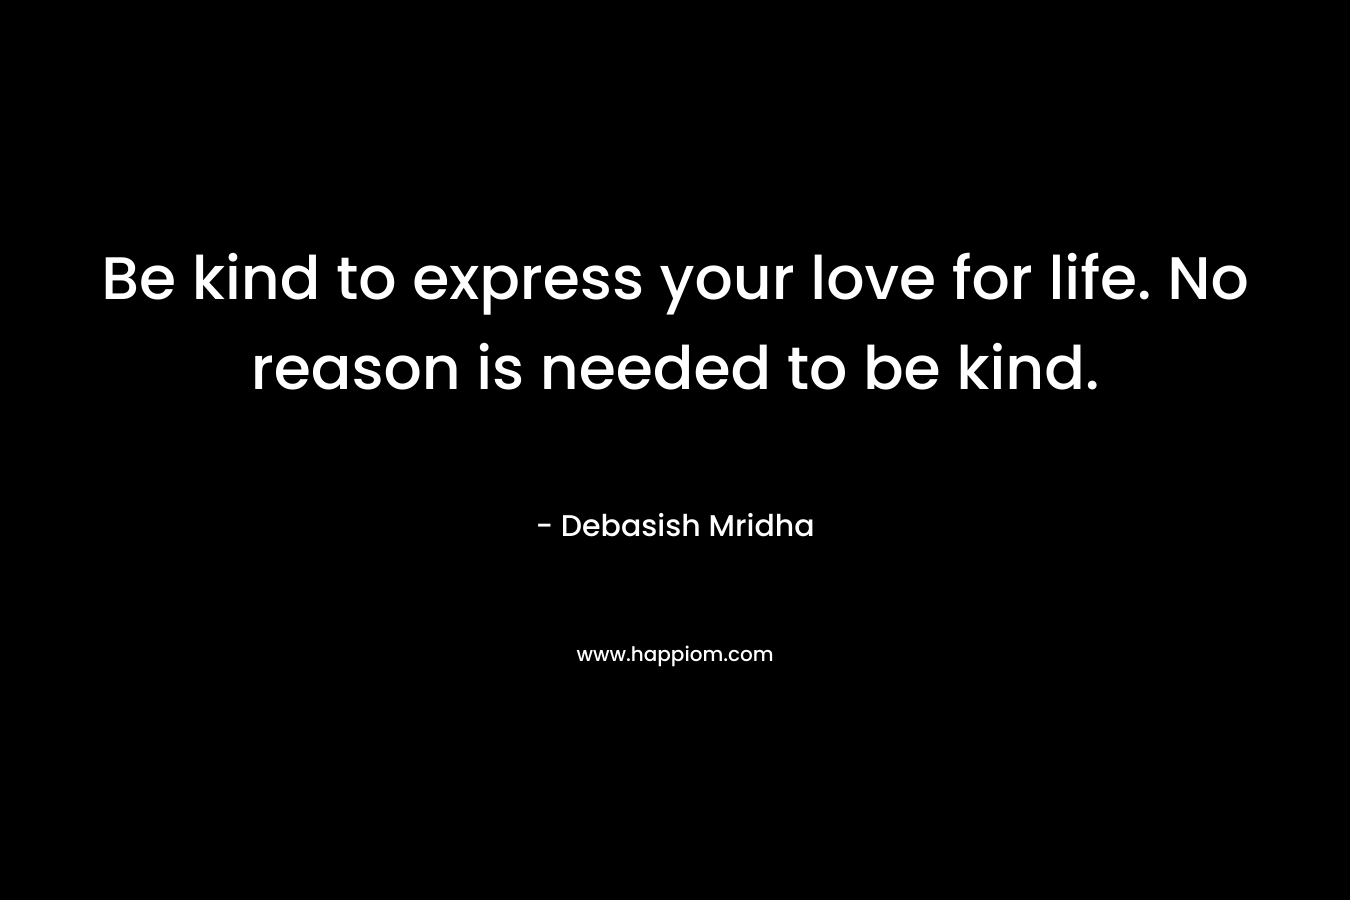 Be kind to express your love for life. No reason is needed to be kind.